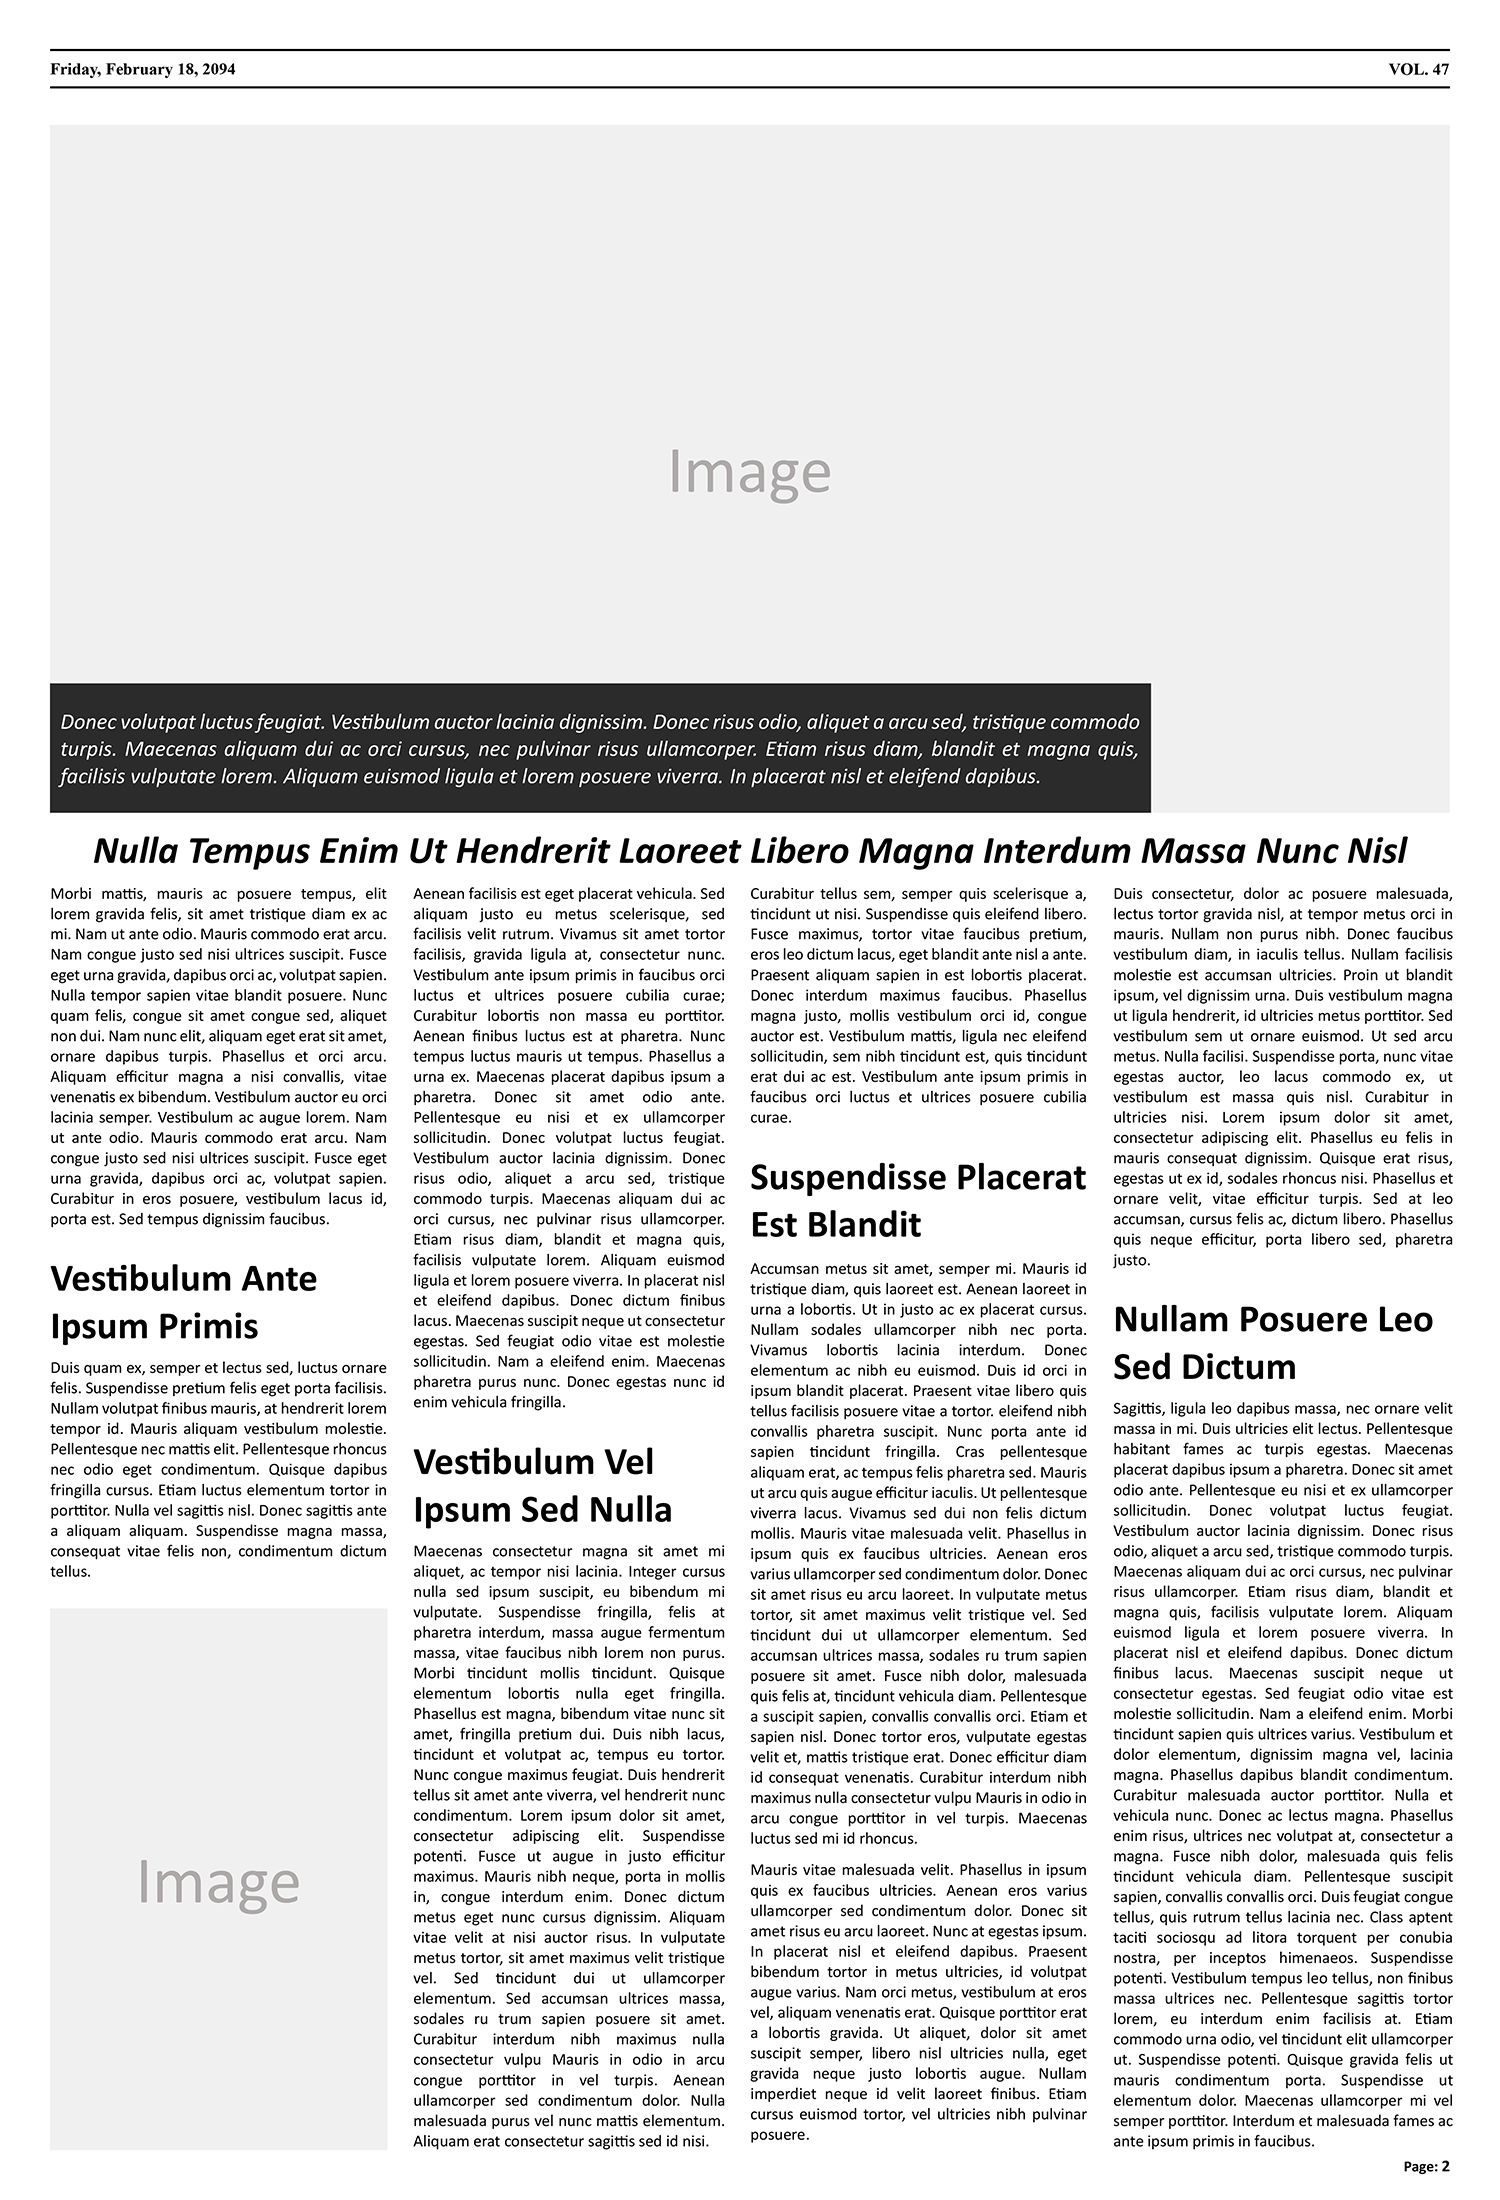 Blank Newspaper Article Page Template - Page 02